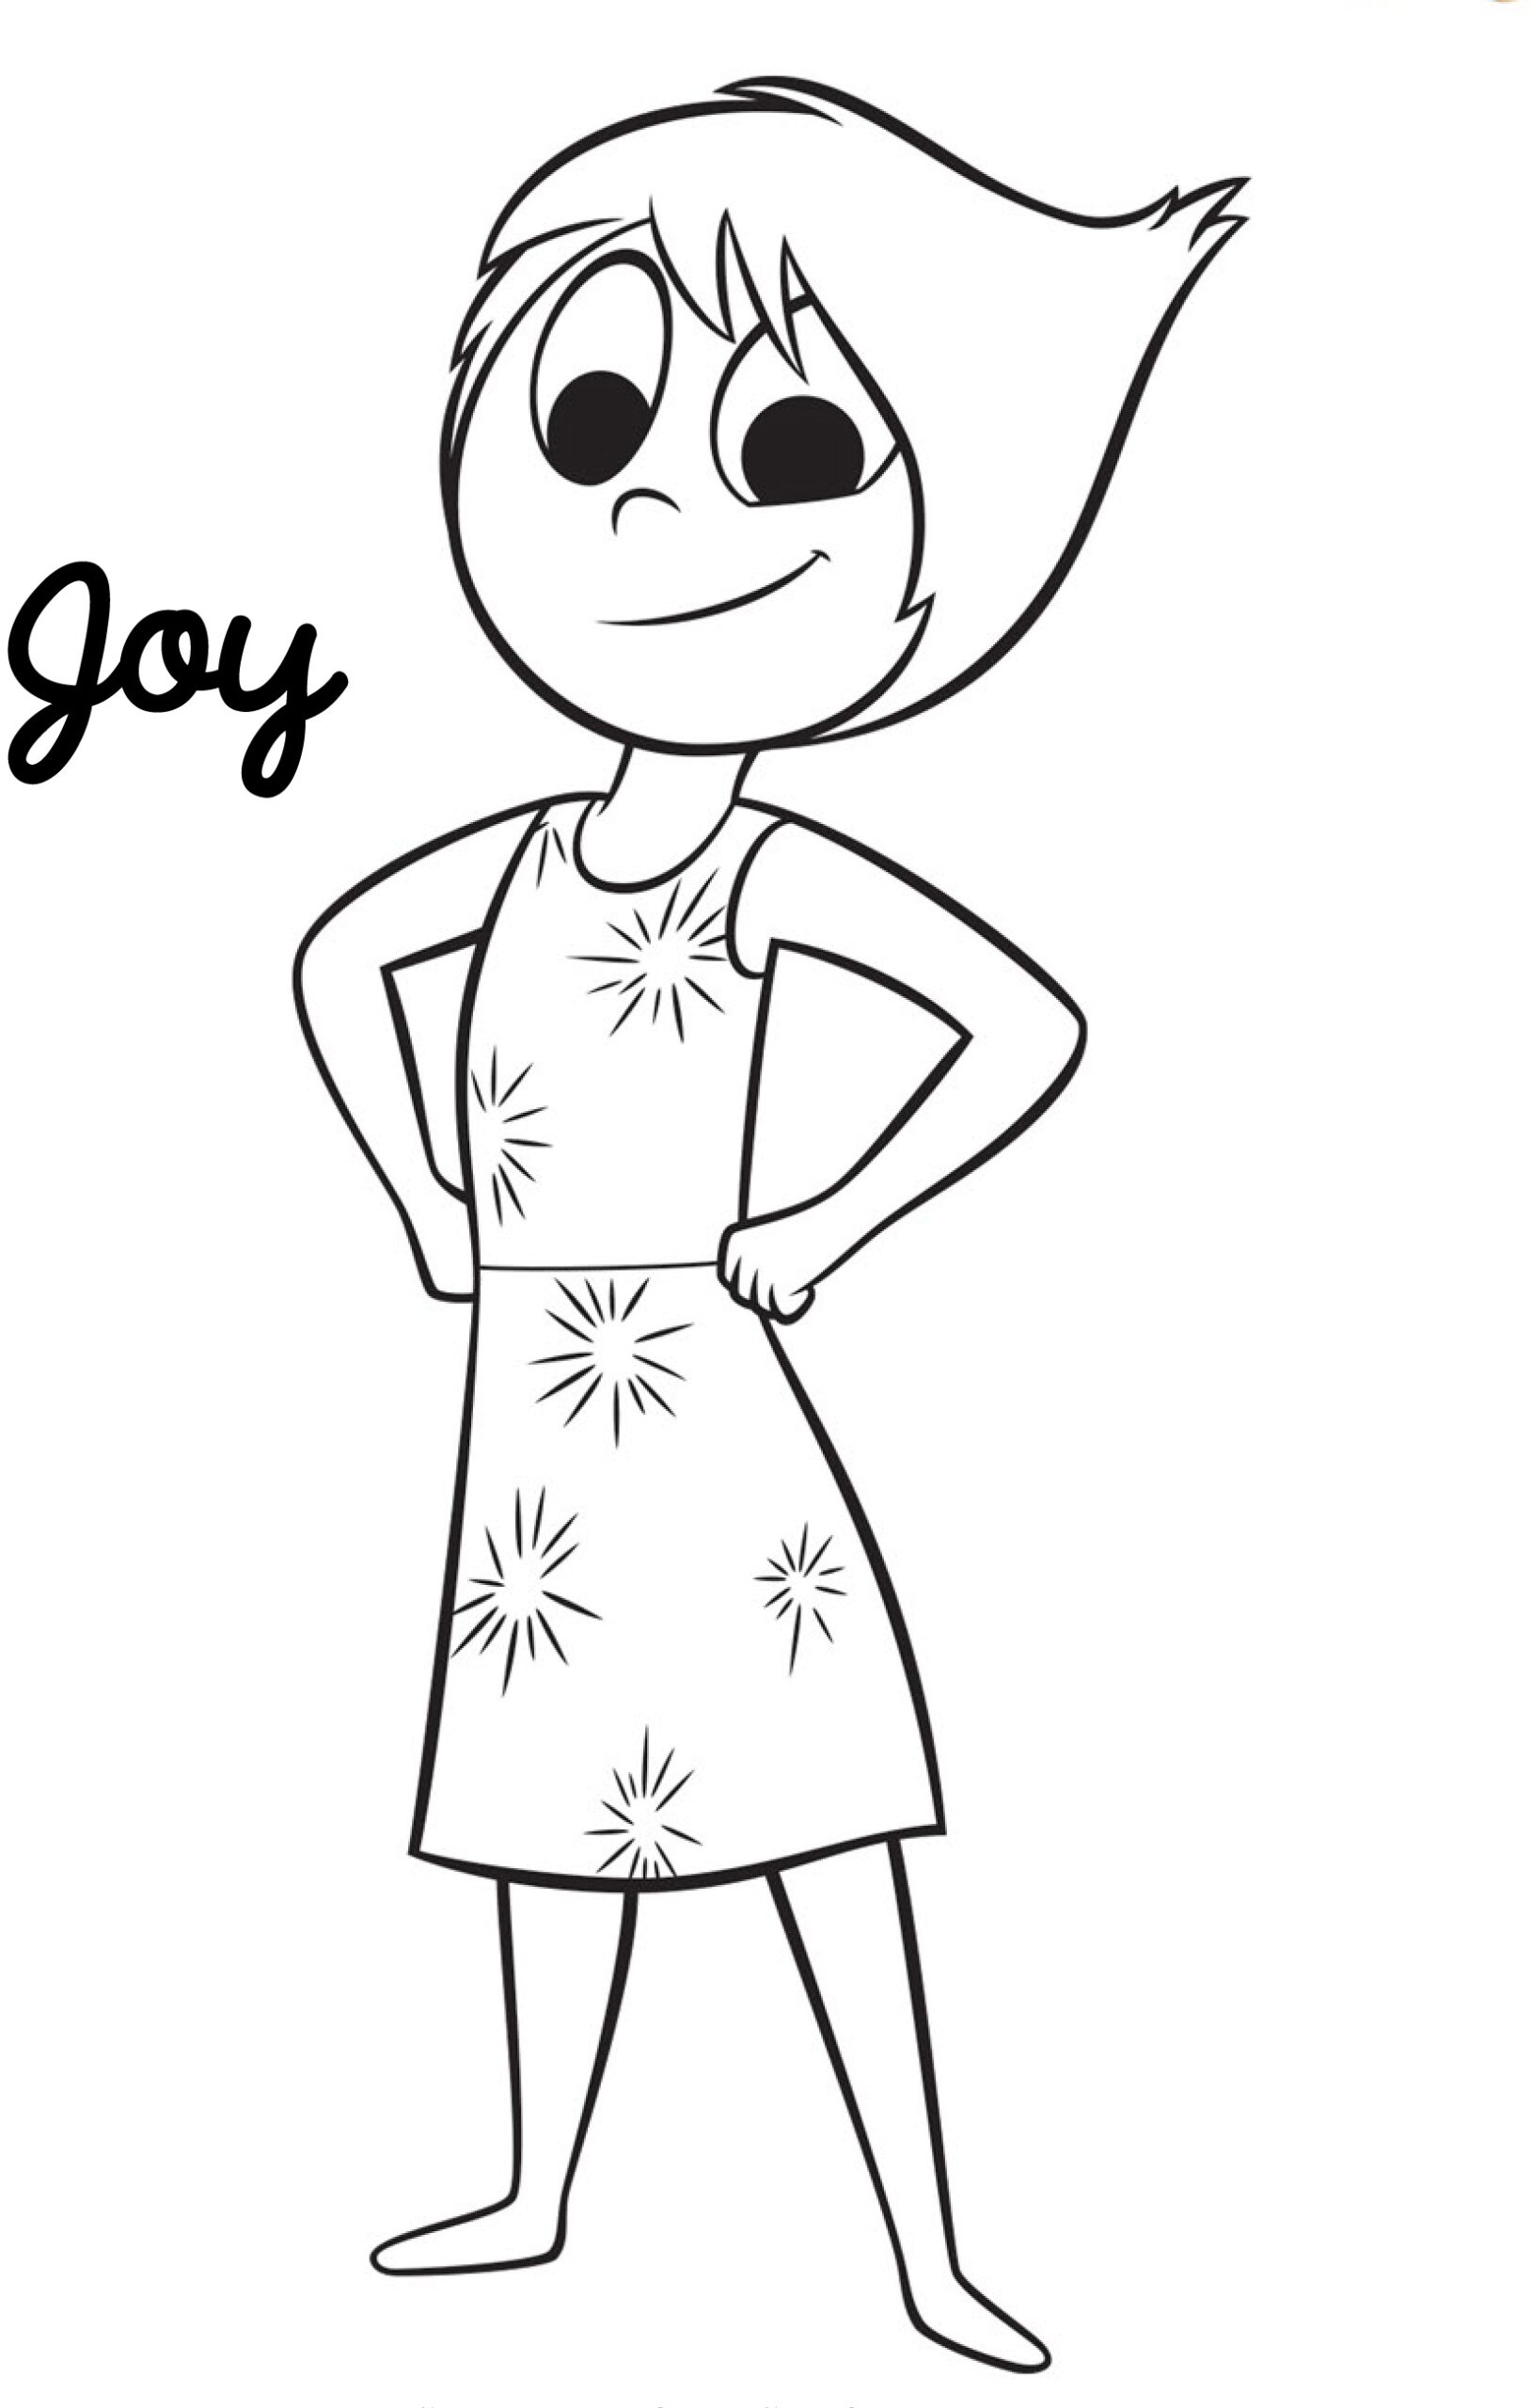 joy inside out coloring pages